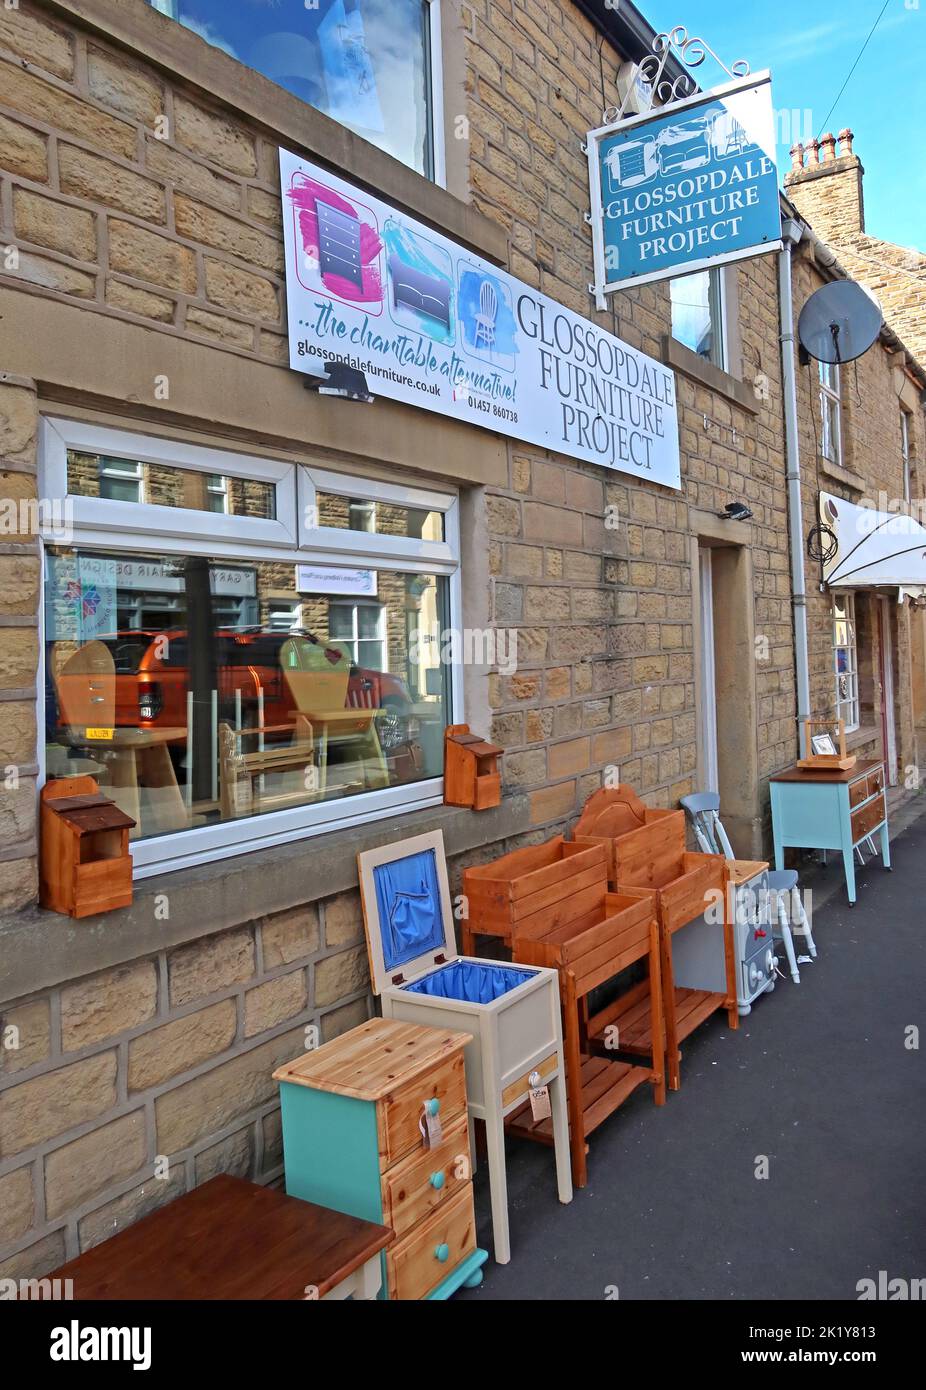 Glossopdale Furniture Project, George St, Glossop, High Peak, Derbys, England, UK, SK13 8AY Stock Photo